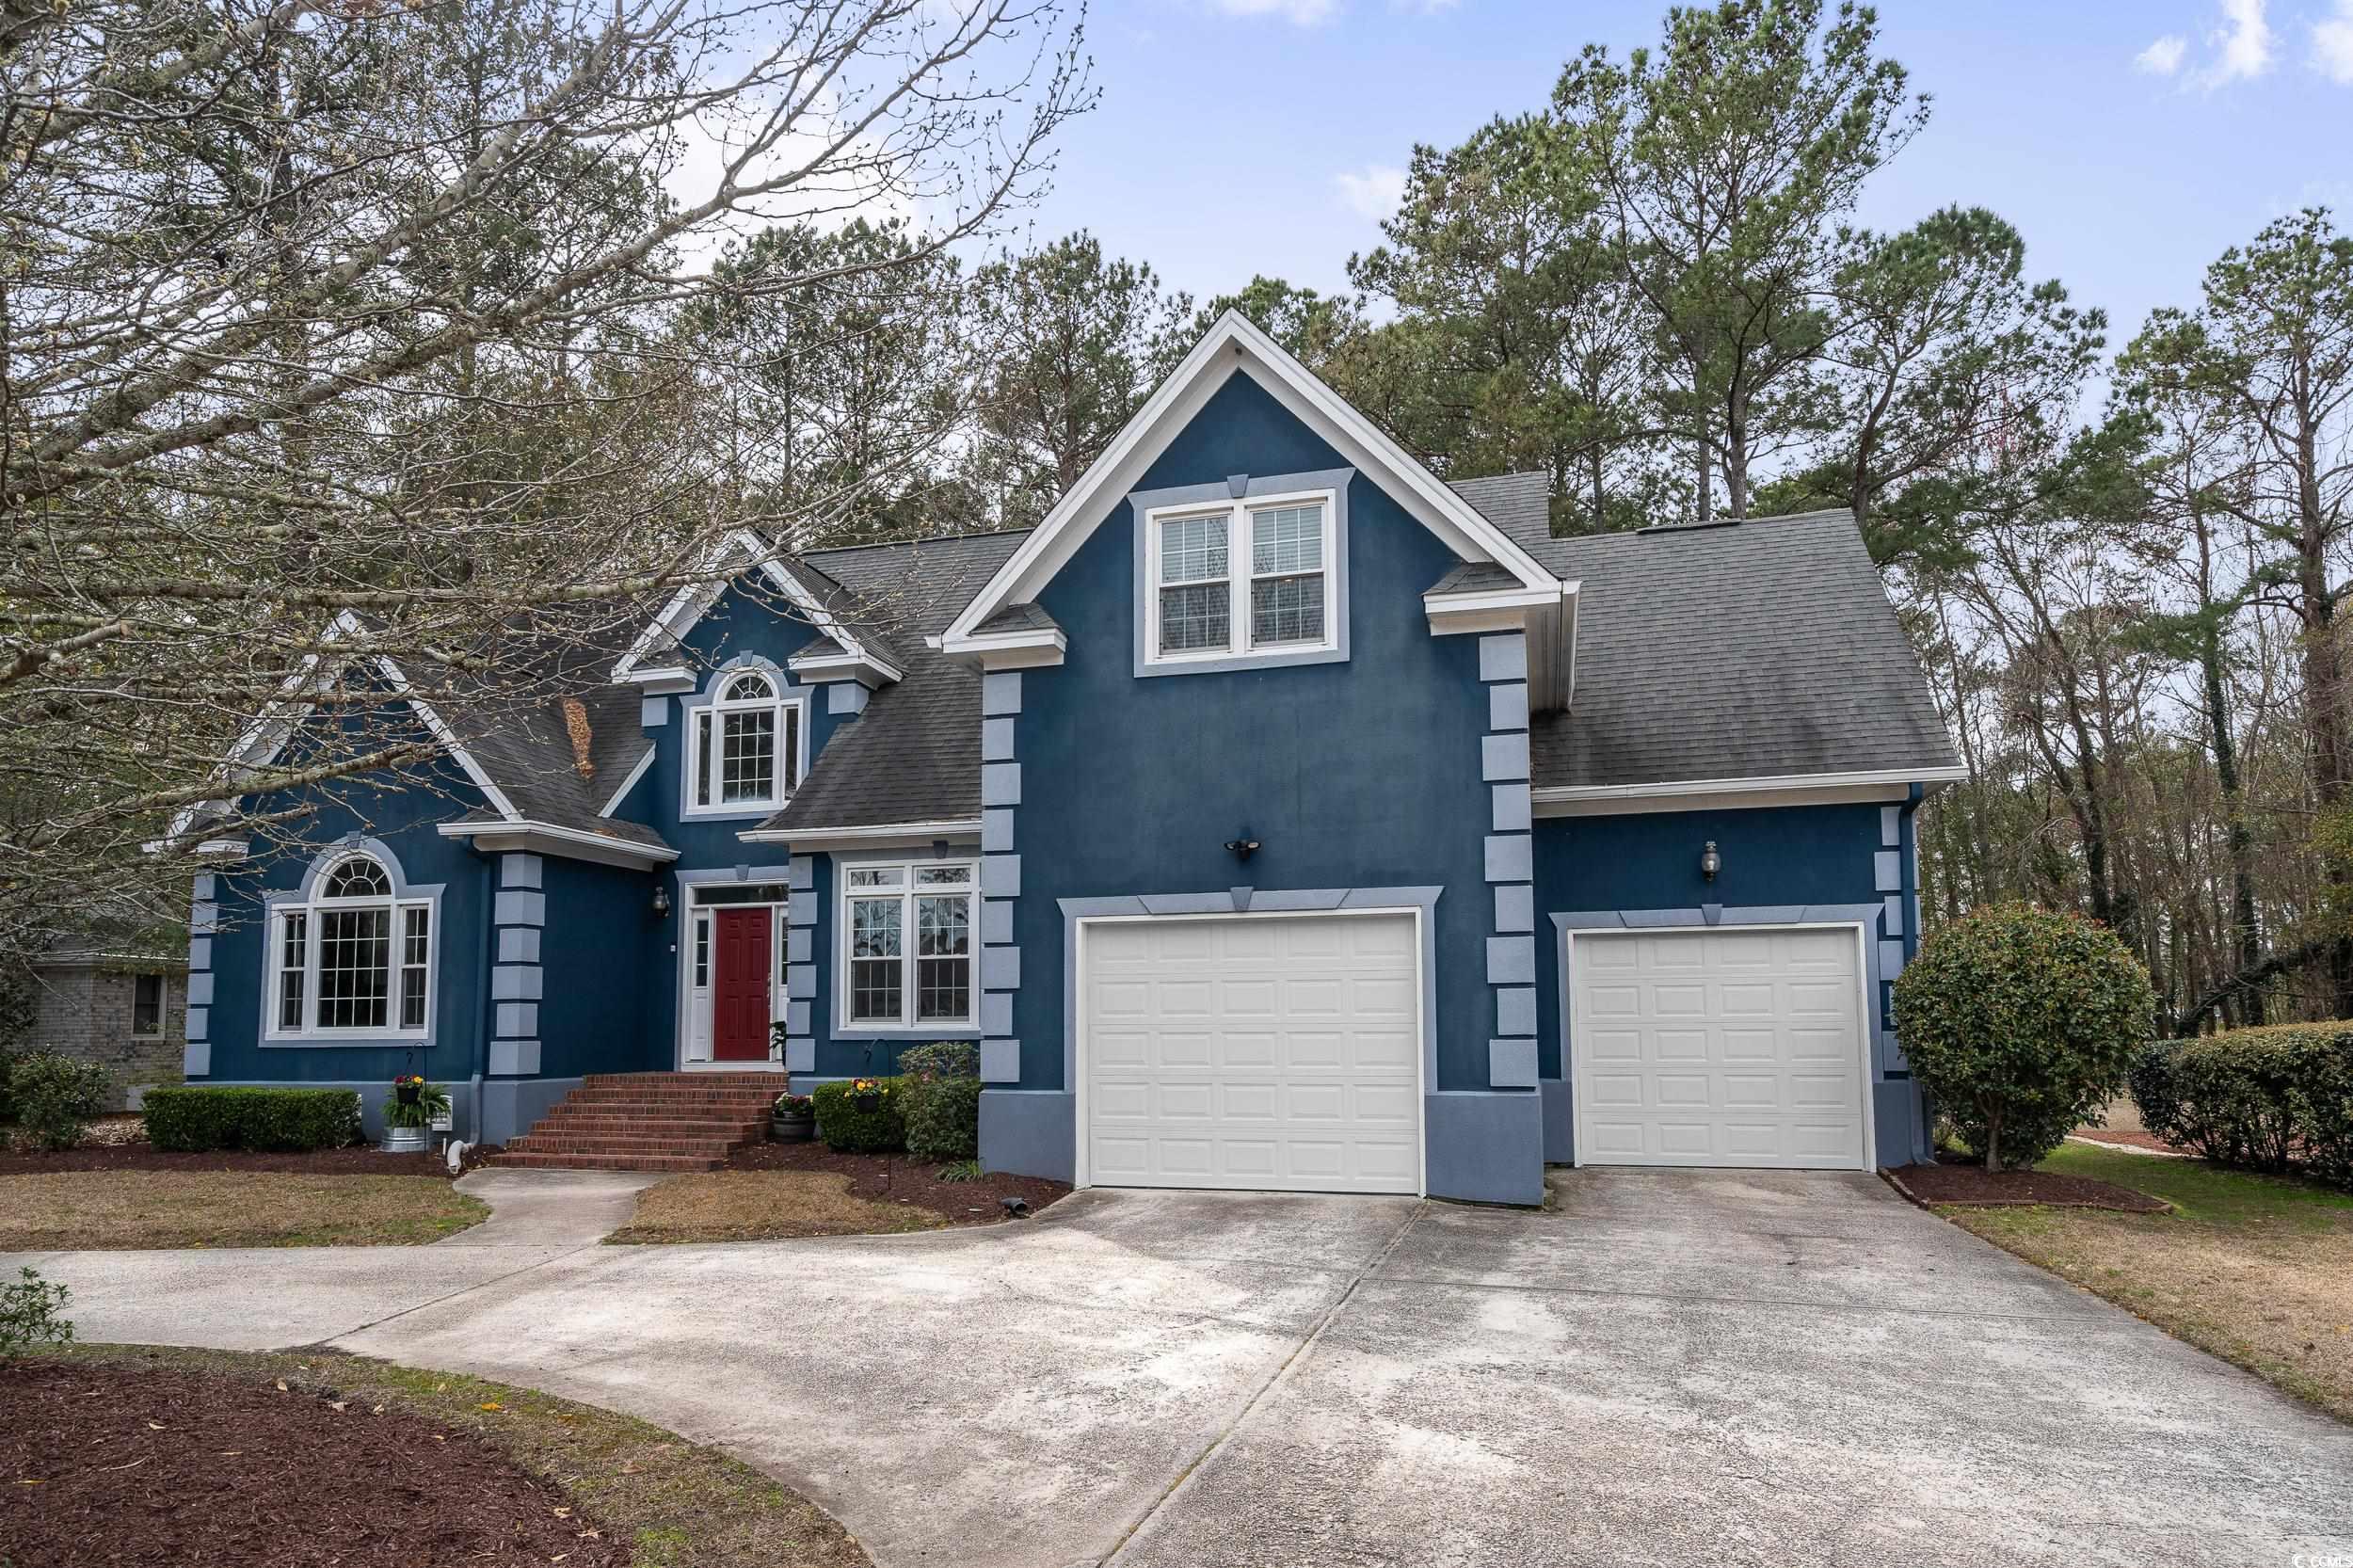 gorgeous home on the golf course, within 2 miles of the beach! located in the highly desired murrells inlet community of indigo creek golf plantation. this custom stucco home offers 4 bedrooms, 3 1/2 bathrooms, mature landscaping, tons of storage, 2-car garage, circle drive for extra parking, large yard & deck with golf course views! step into your grand foyer revealing a beautiful wood staircase and open concept with catwalk views...perfect for photo opportunities! the spacious living room has new flooring, high vaulted ceilings & a wall of windows and doors that add a ton of natural light, a generous space providing multiple options for furniture placement. through the living room you will see the well appointed kitchen with large work island & cooktop, wall oven, large stainless steel sink, granite countertops, tiled backsplash, ample cabinet storage & pantry, allows room for 2 or 3 to be in the kitchen at the same time cooking and prepping for your family or guests! off the kitchen is a laundry room with sink & access to your 2-car garage. the formal dining room with tray ceiling and large windows could also be used as a home office, it has double glass doors & pocket door to close off for privacy. primary suite is located on the 1st floor, the ensuite bathroom feels roomy & spa like with its large double vanity, walk-in shower, large jacuzzi tub, 2 walk-in closets & linen closets. second floor features catwalk overlooking the foyer & living room, 2nd bedroom with private bathroom, 3rd bedroom or family room, 4th bedroom and oversized storage closets with office or exercise room potential. unwind & relax on your back deck enjoying the carolina skies, wildlife and golf views! community features include a clubhouse, golfing & pool. close proximity to the famous murrells inlet marsh walk, garden city & surfside beach, mb airport, medical facilities, restaurants, golfing, shopping, dining, entertainment...all the grand strand has to offer! this home has so many possibilities! don't let this opportunity slip away! call to schedule your showing today!